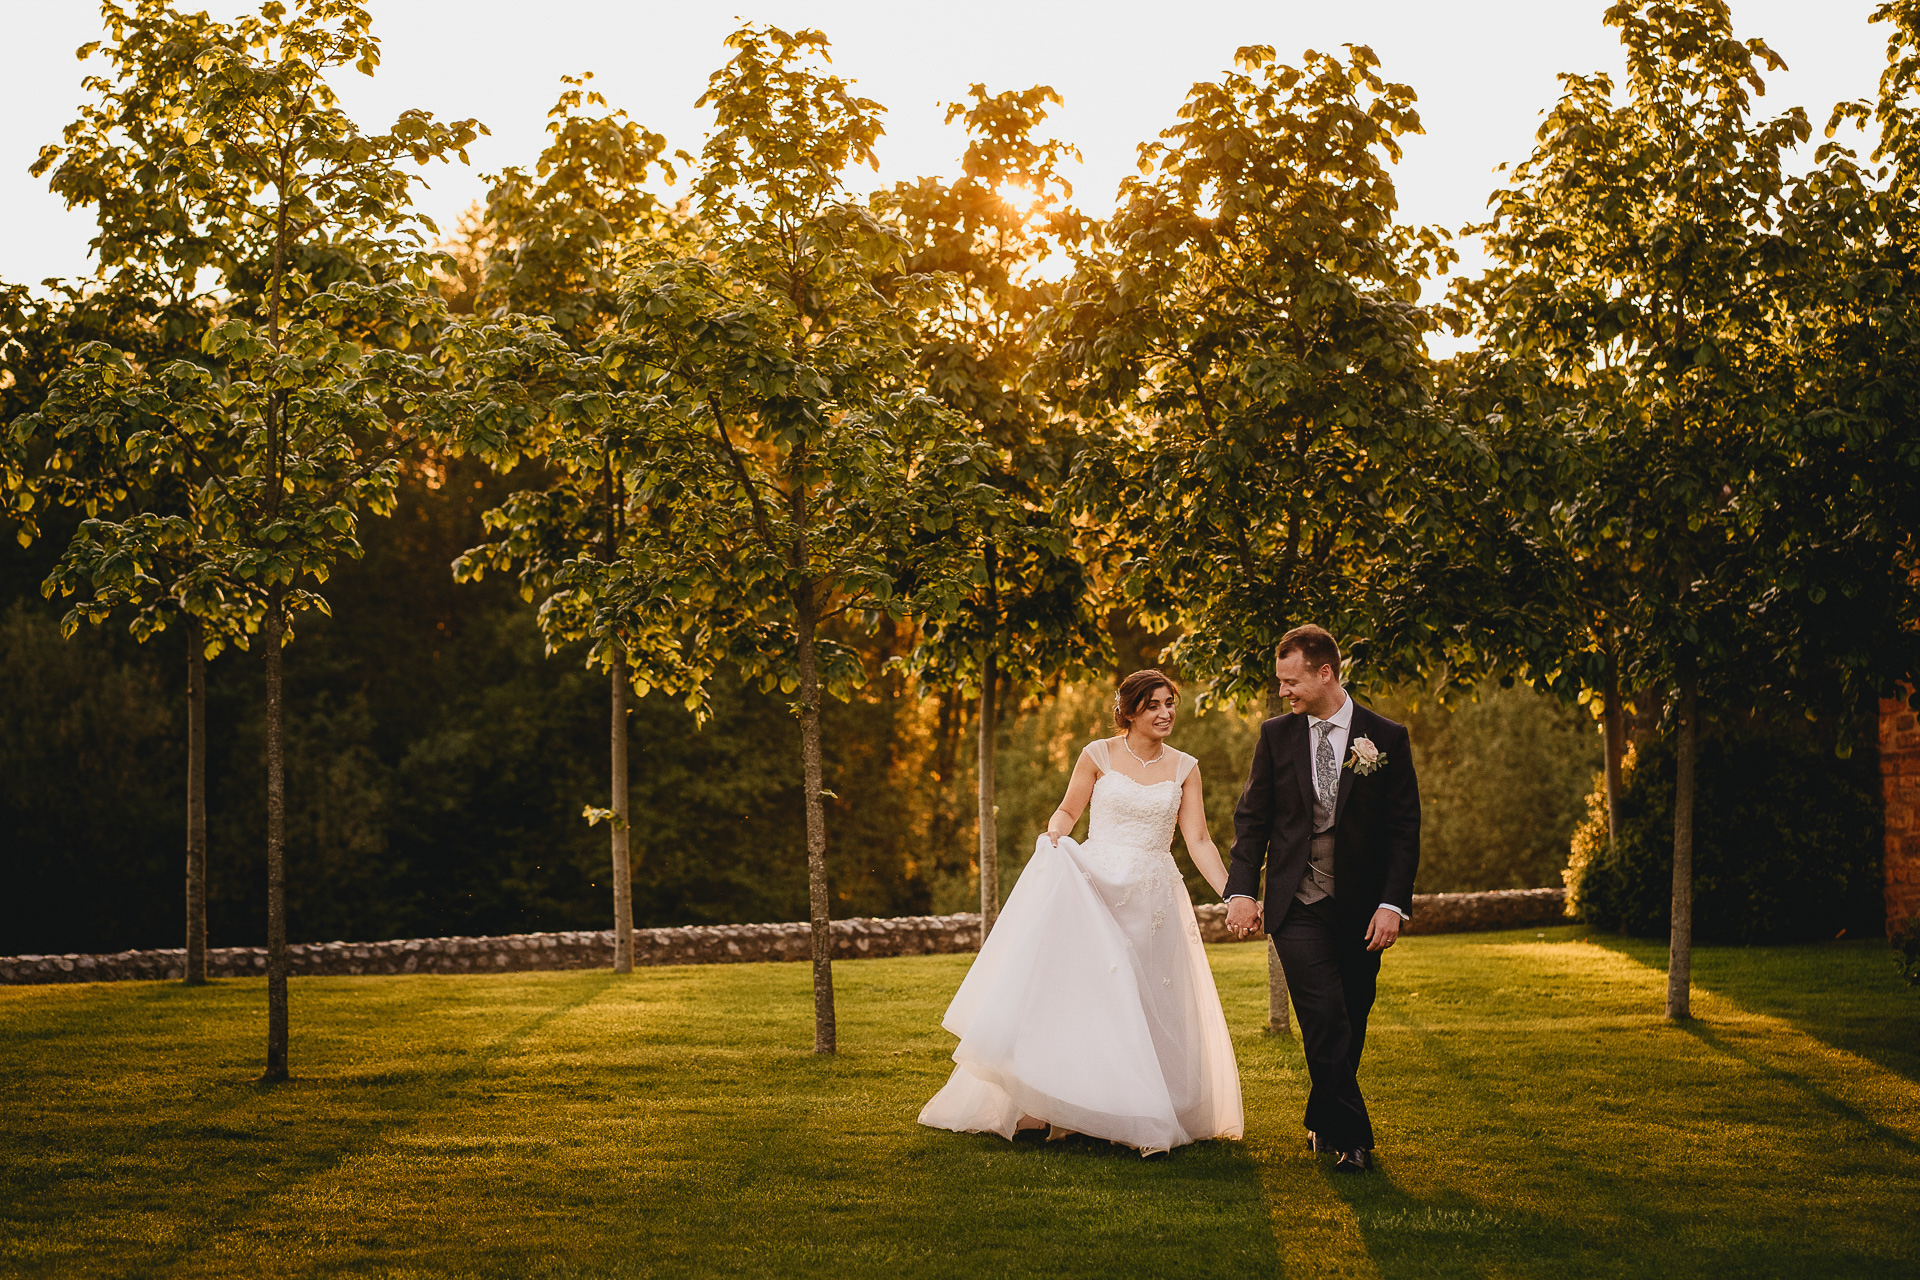 A bride and groom walking together in evening light